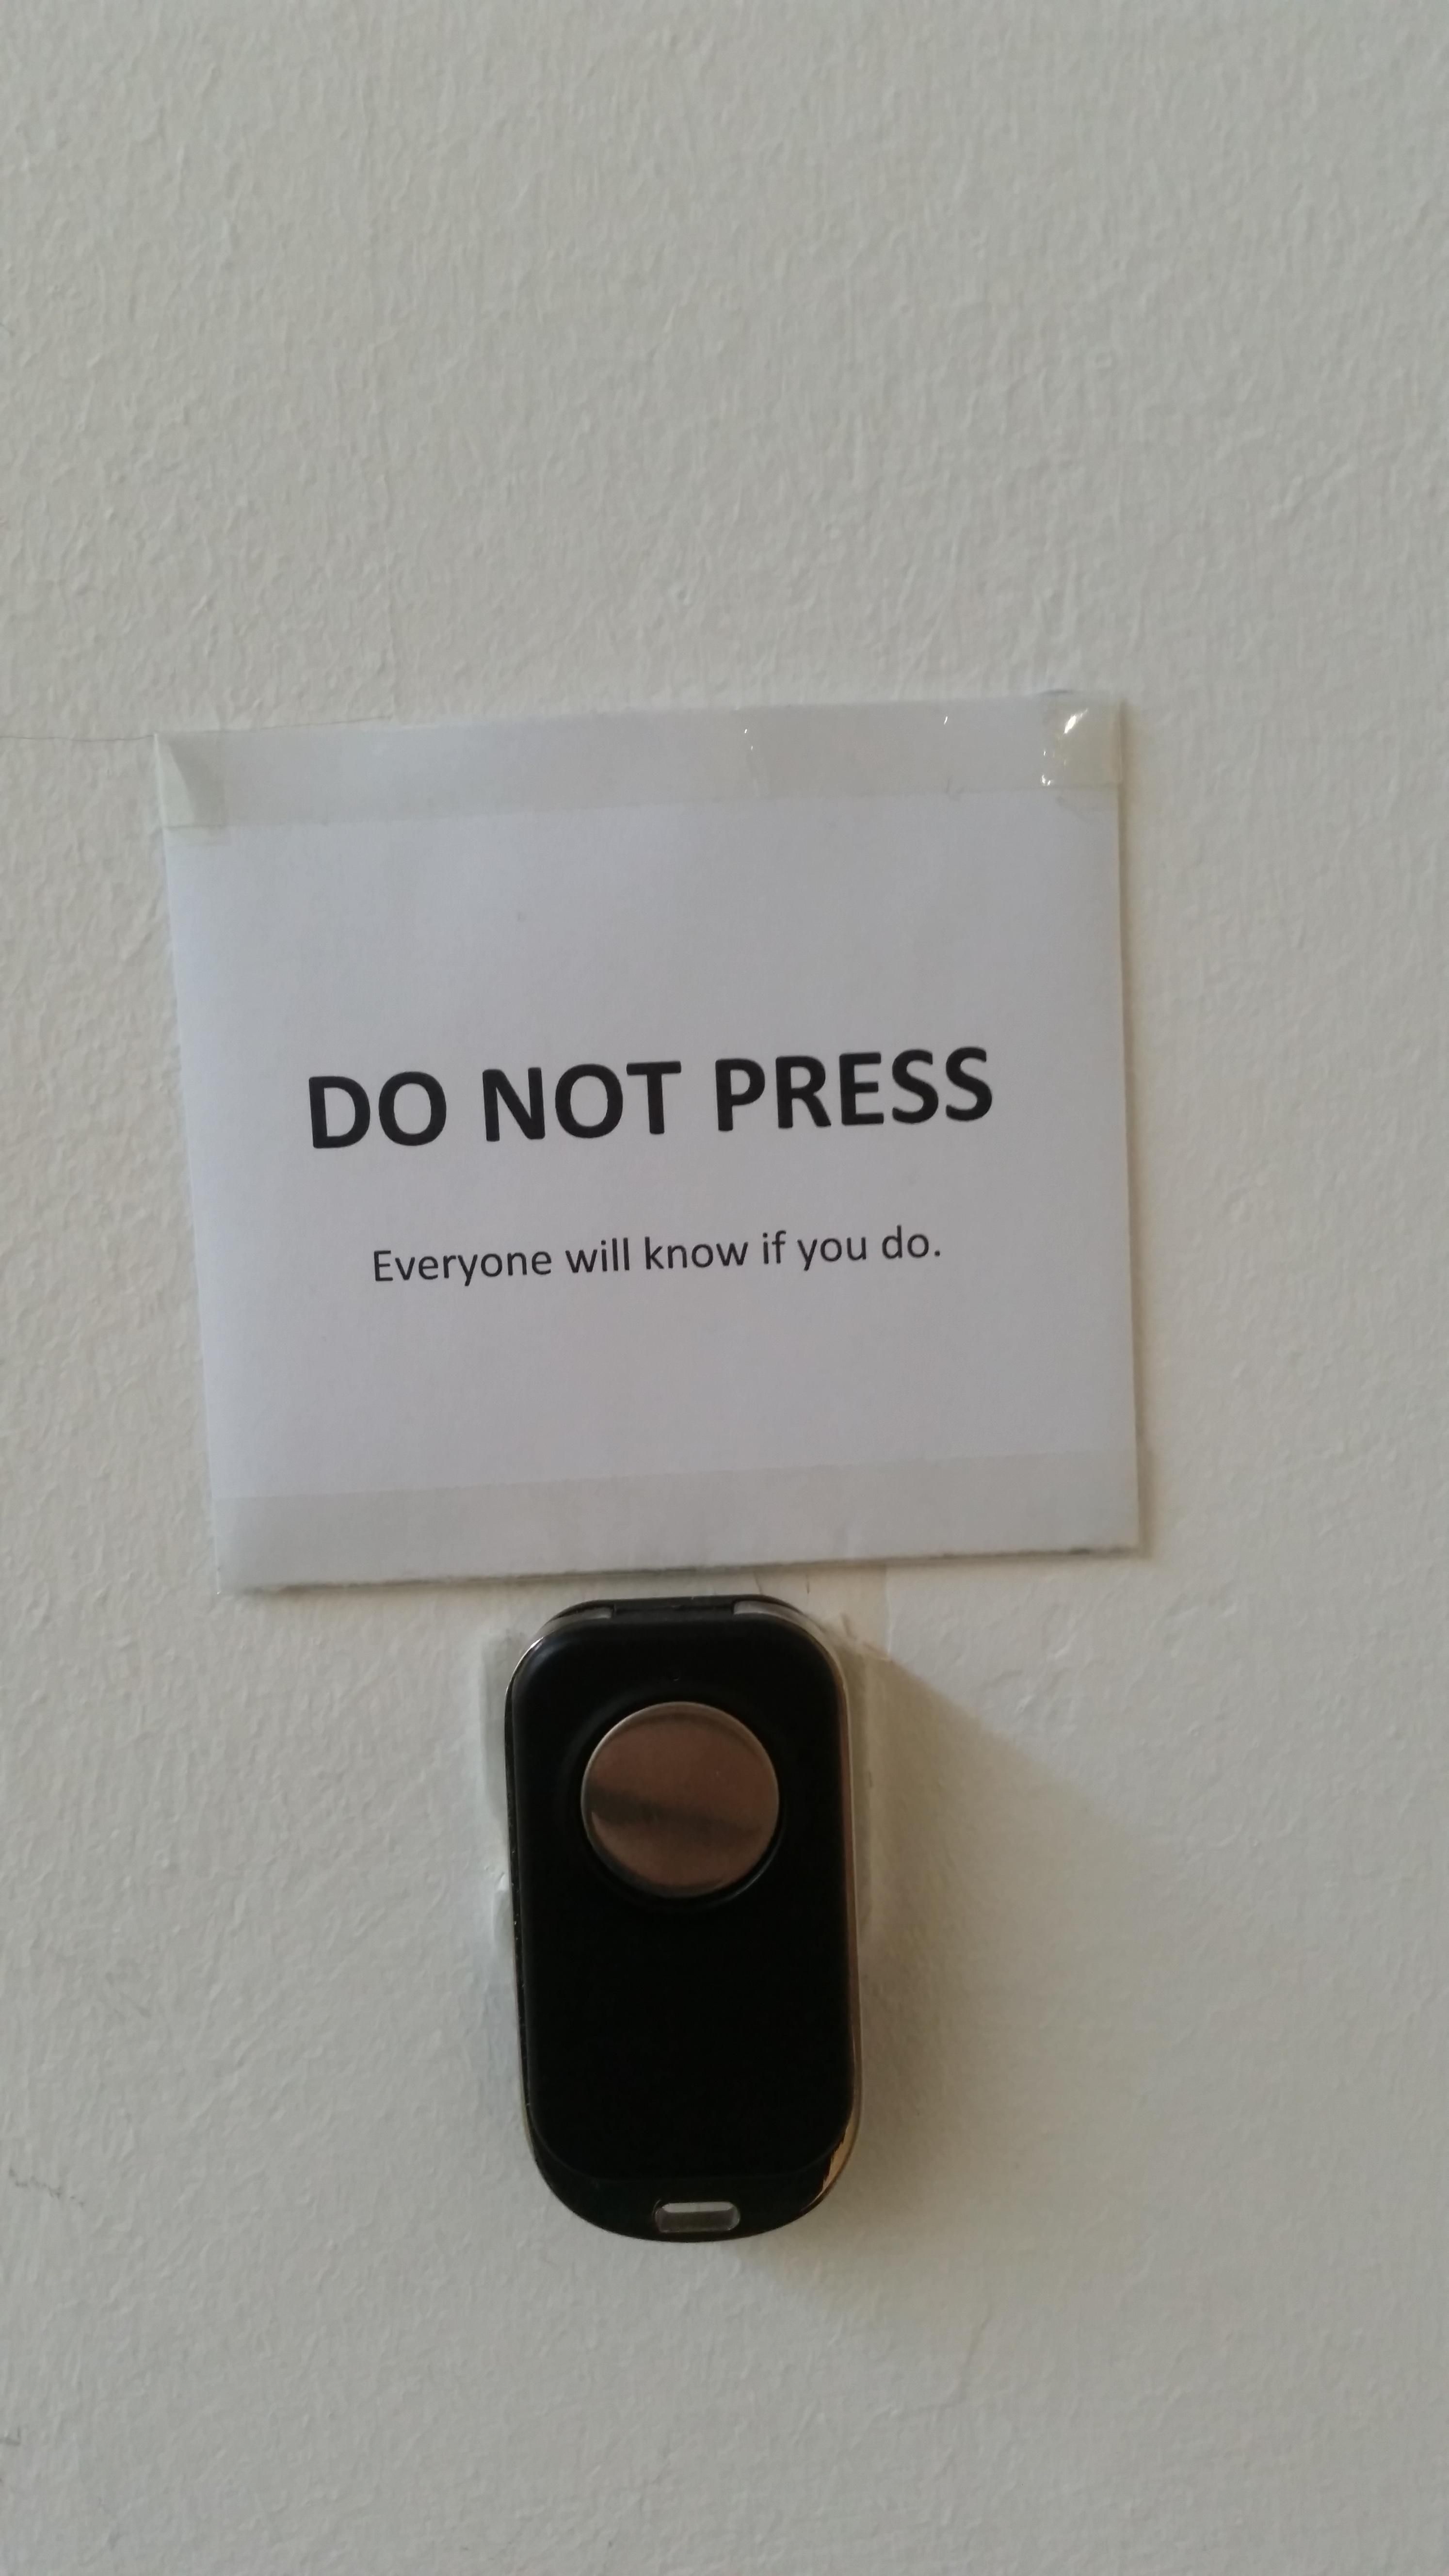 There's a mysterious new button at my place of work...